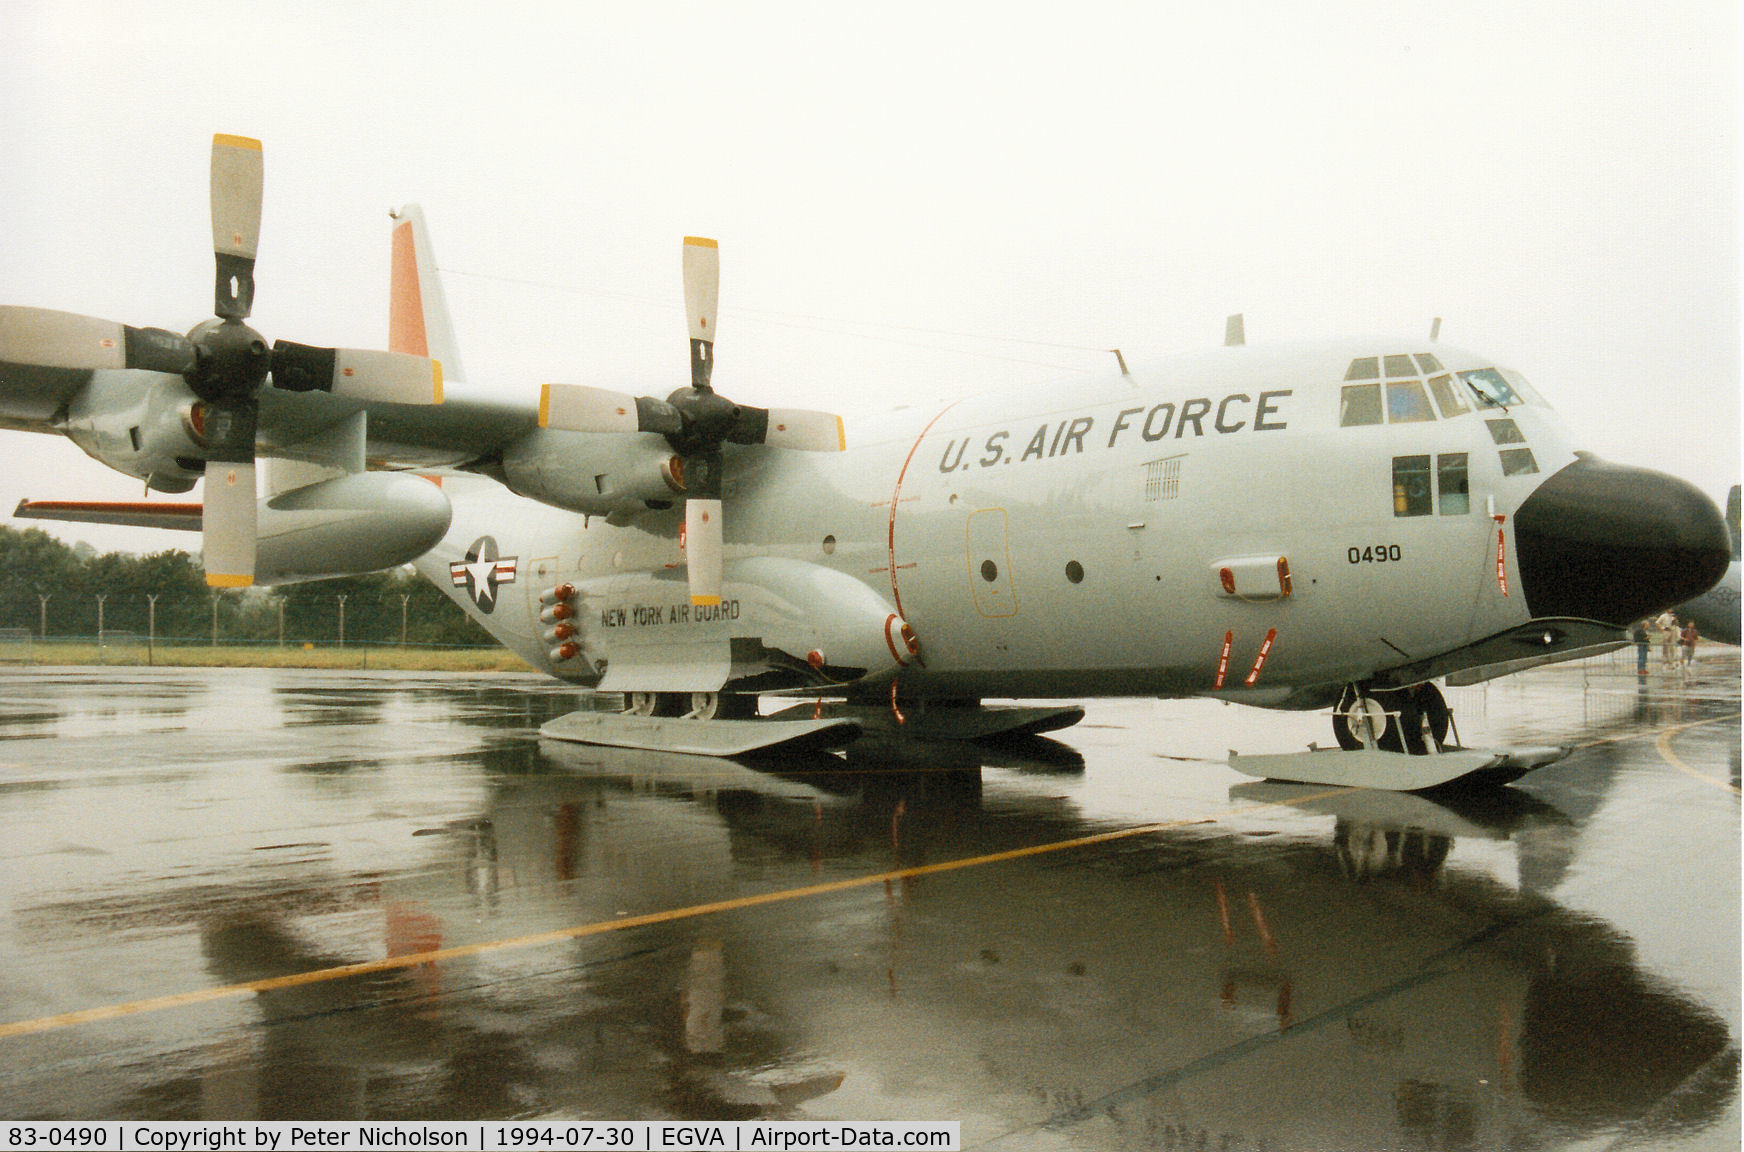 83-0490, 1983 Lockheed LC-130H Hercules C/N 382-5007, LC-130H Hercules, callsign Skier 40, of the New York Air National Guard on display at the 1994 Intnl Air Tattoo at RAF Fairford.